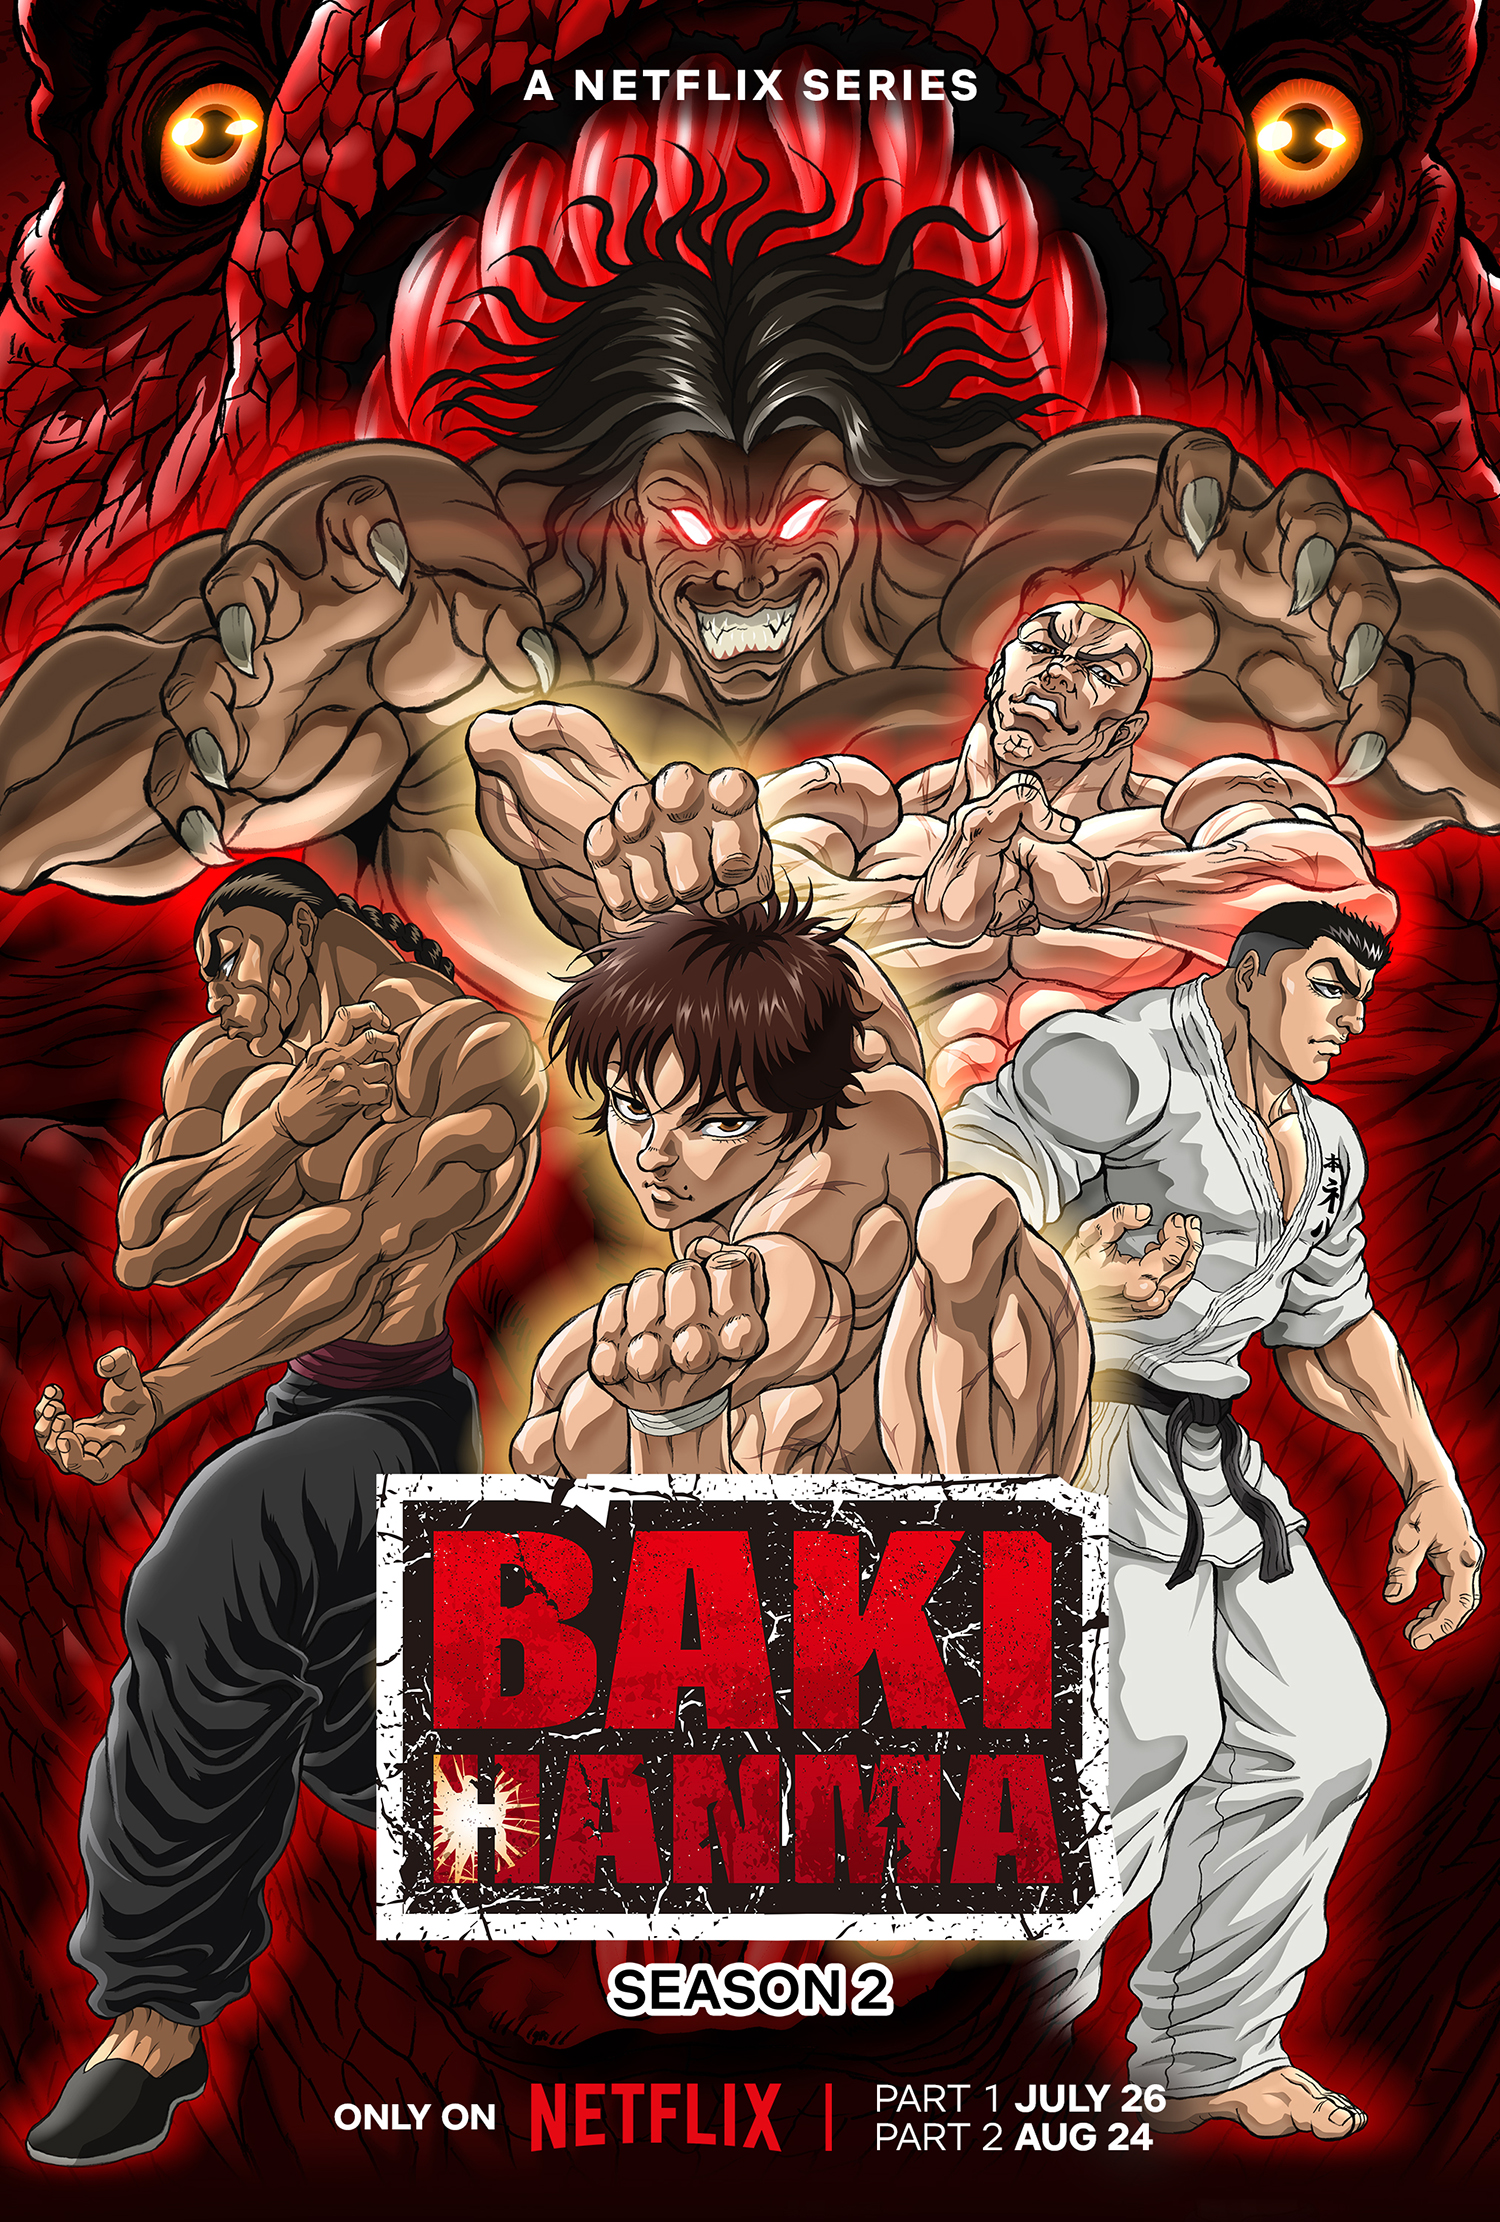 Will there be a Baki Hanma season 3? Release date speculation